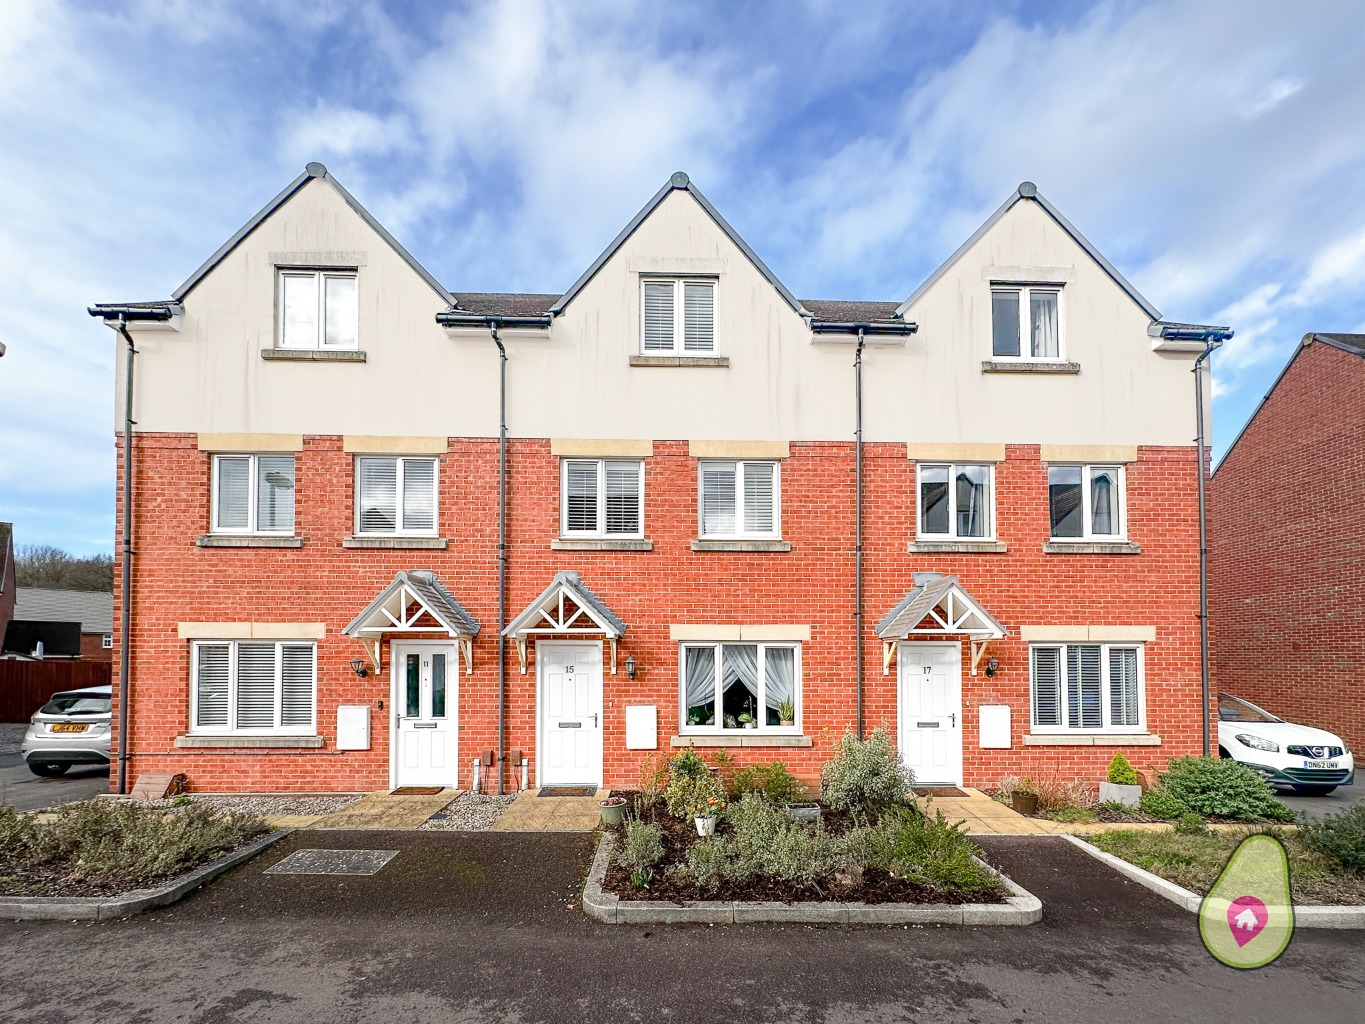 4 bed terraced house for sale in Cuckoo Lane, Bracknell  - Property Image 1